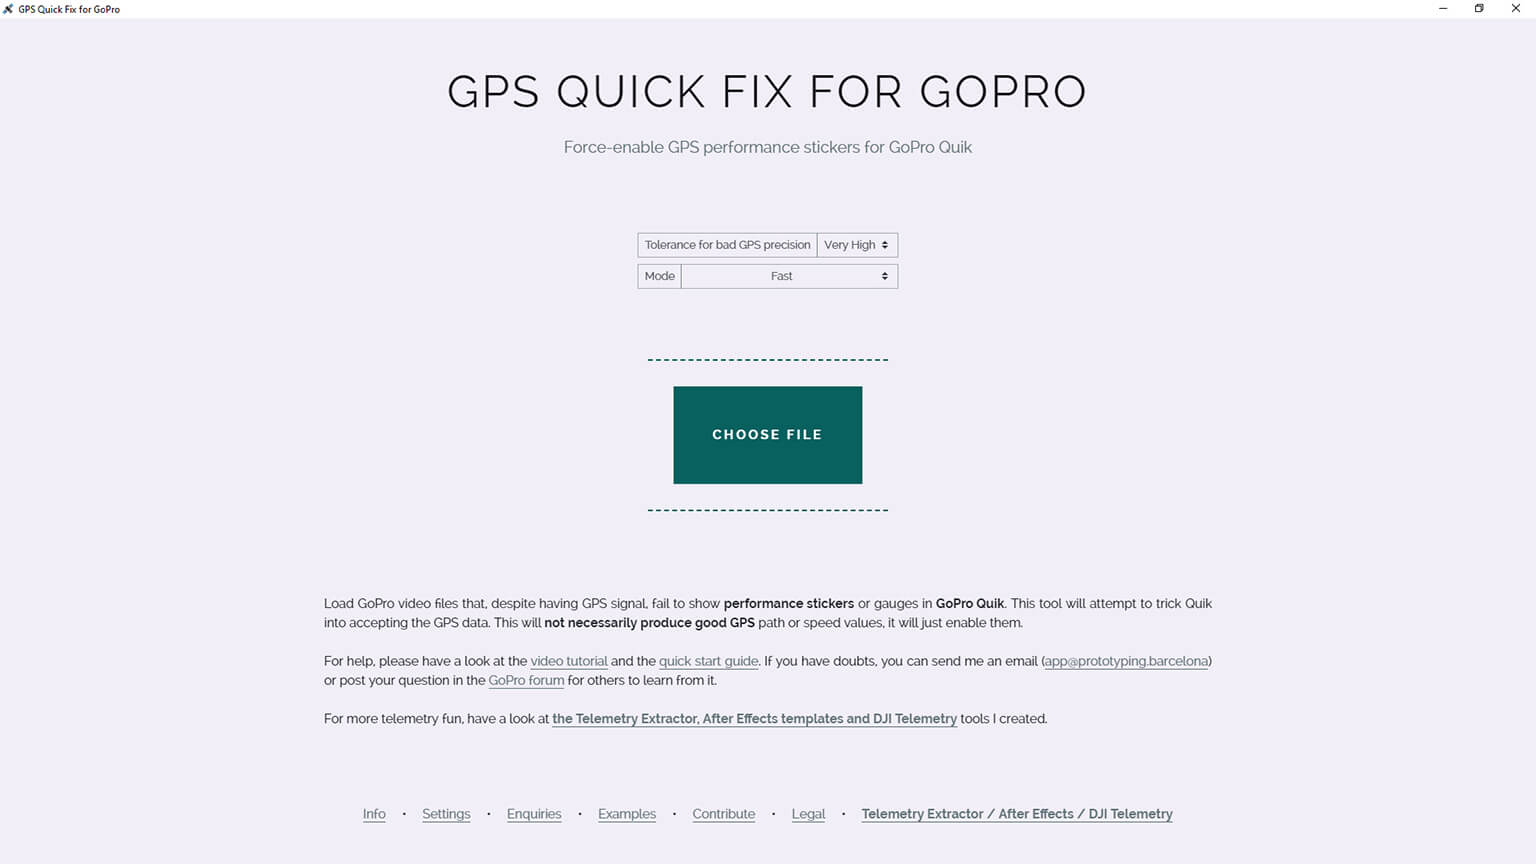 gps quick fix for gopro